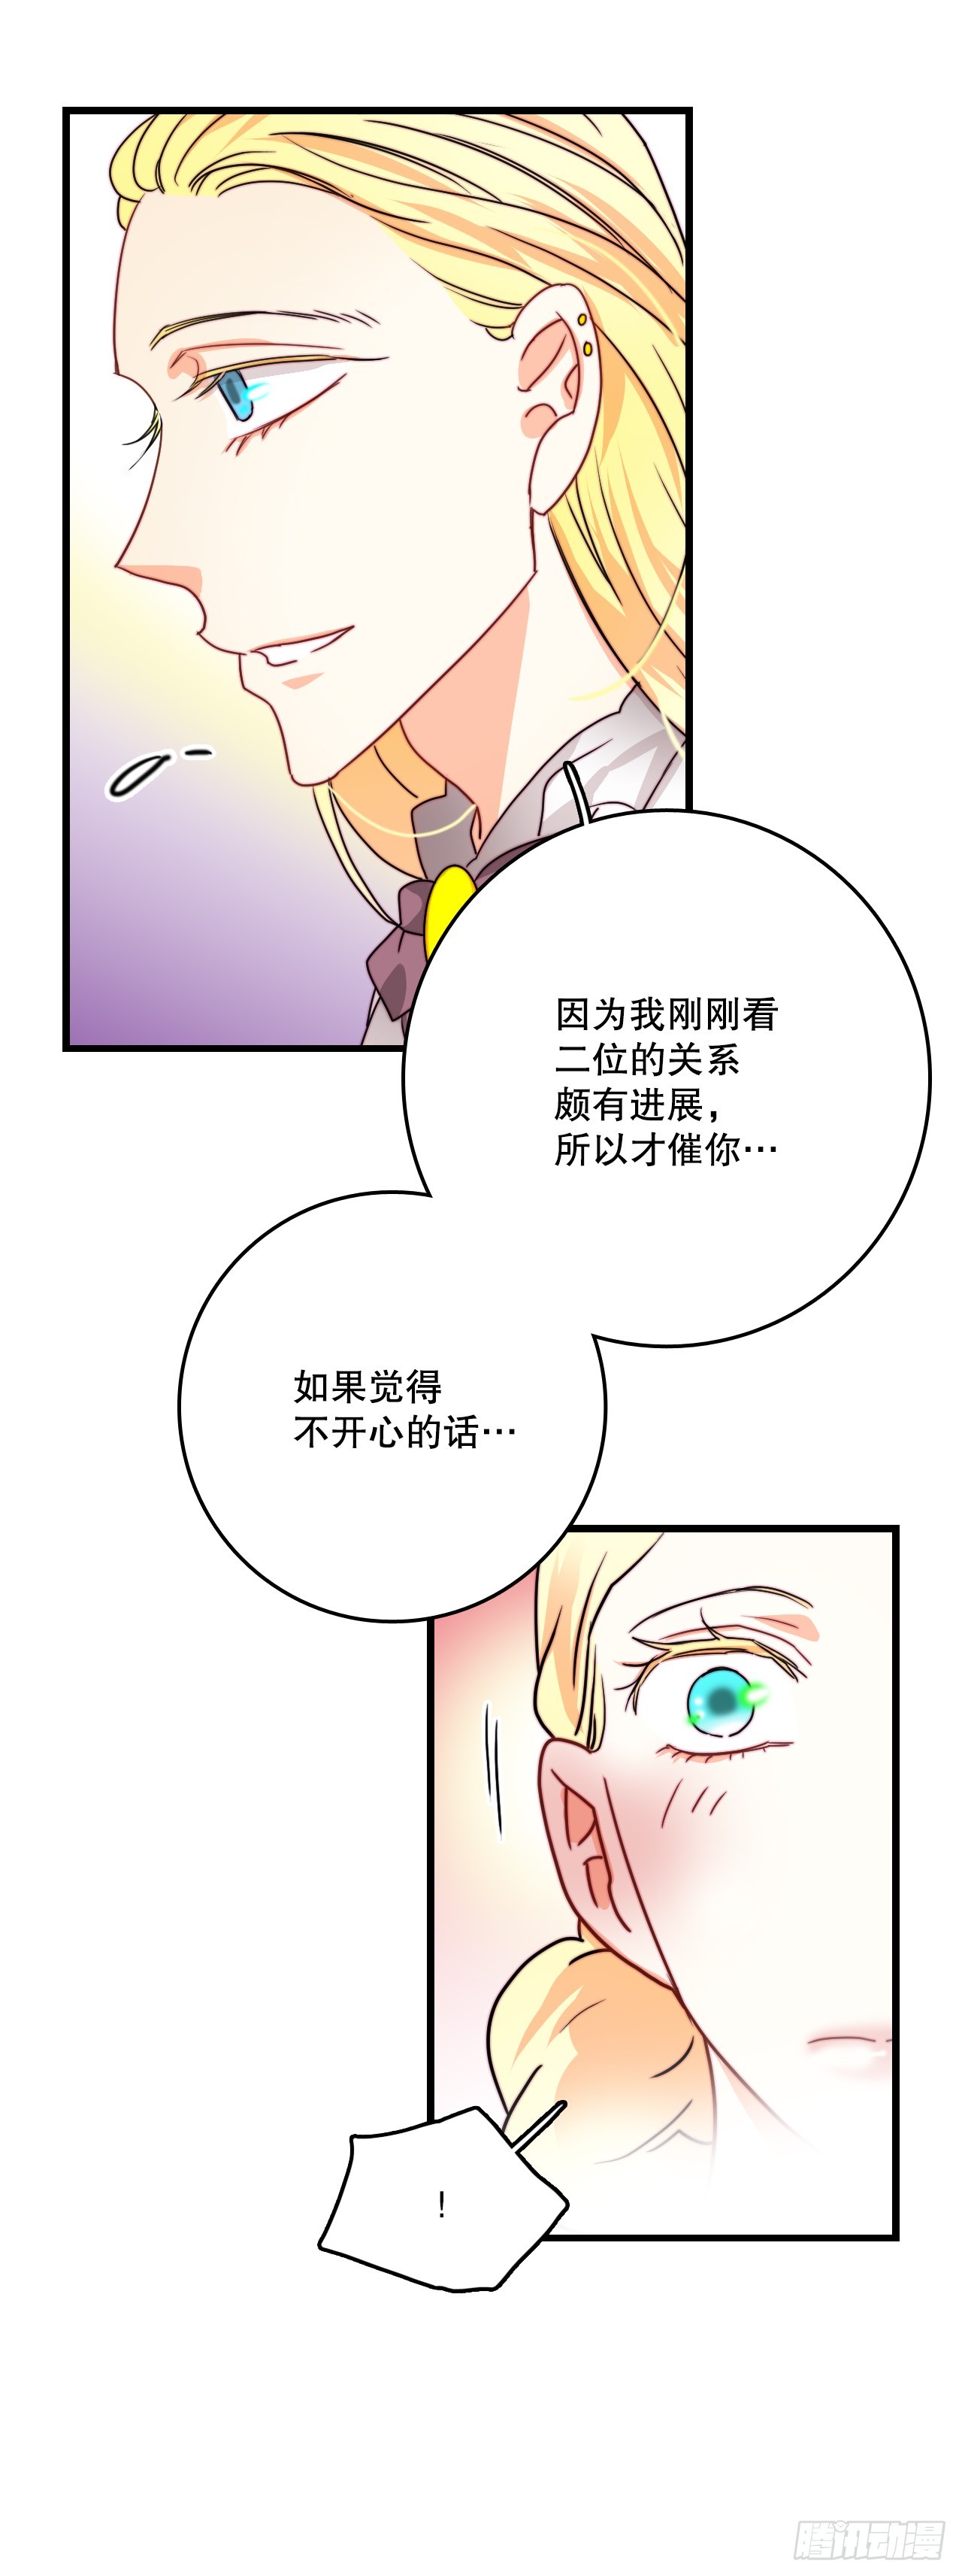 Bring the Love - 37.想對策(1/2) - 7